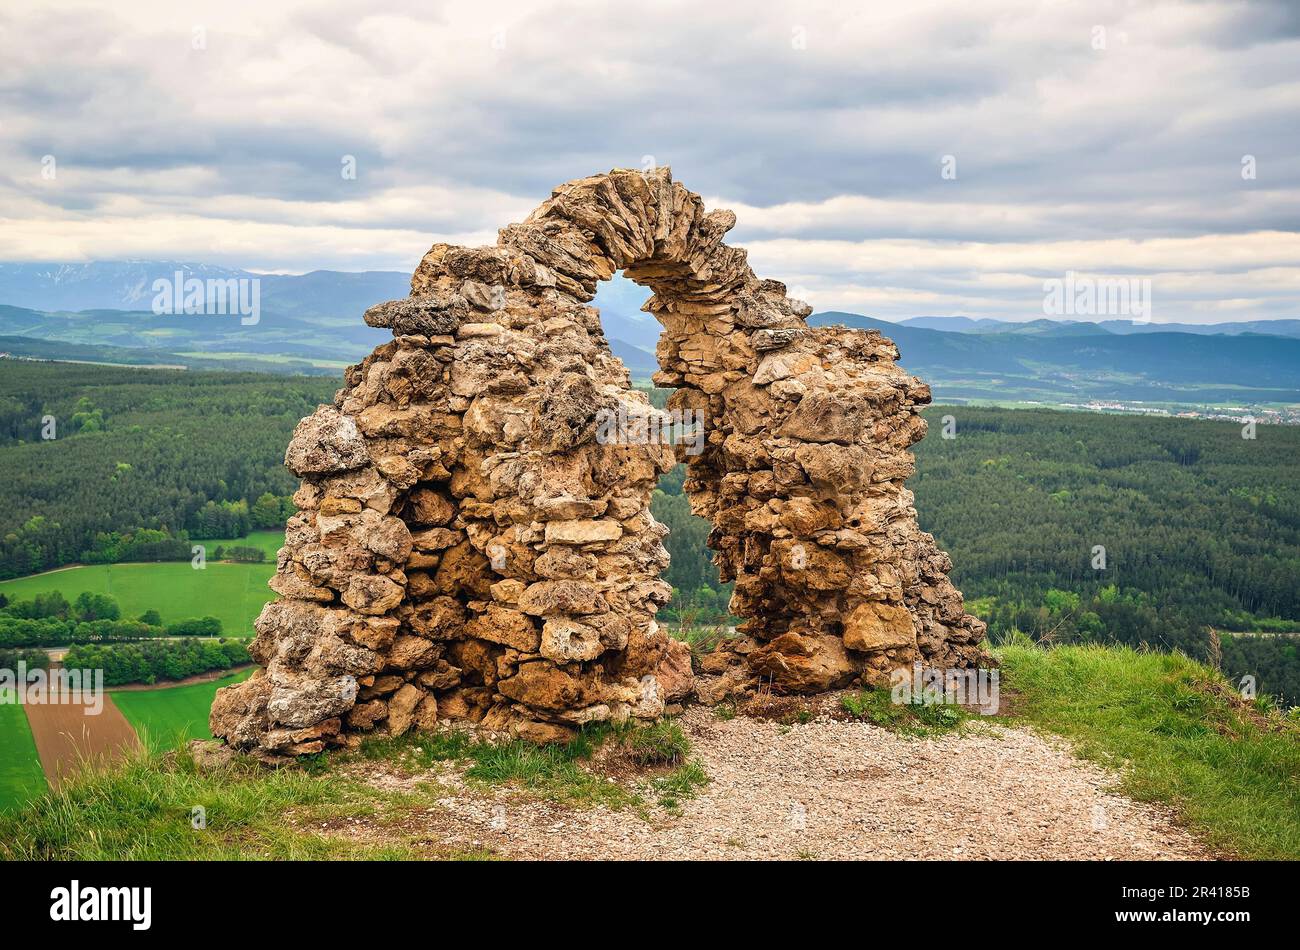 Ancient ruins on a Rockface in Gleissenfeld. Ruins are located in Nature Park Seebenstein-Turkensturz in Austria, with mountains and village in backgr Stock Photo